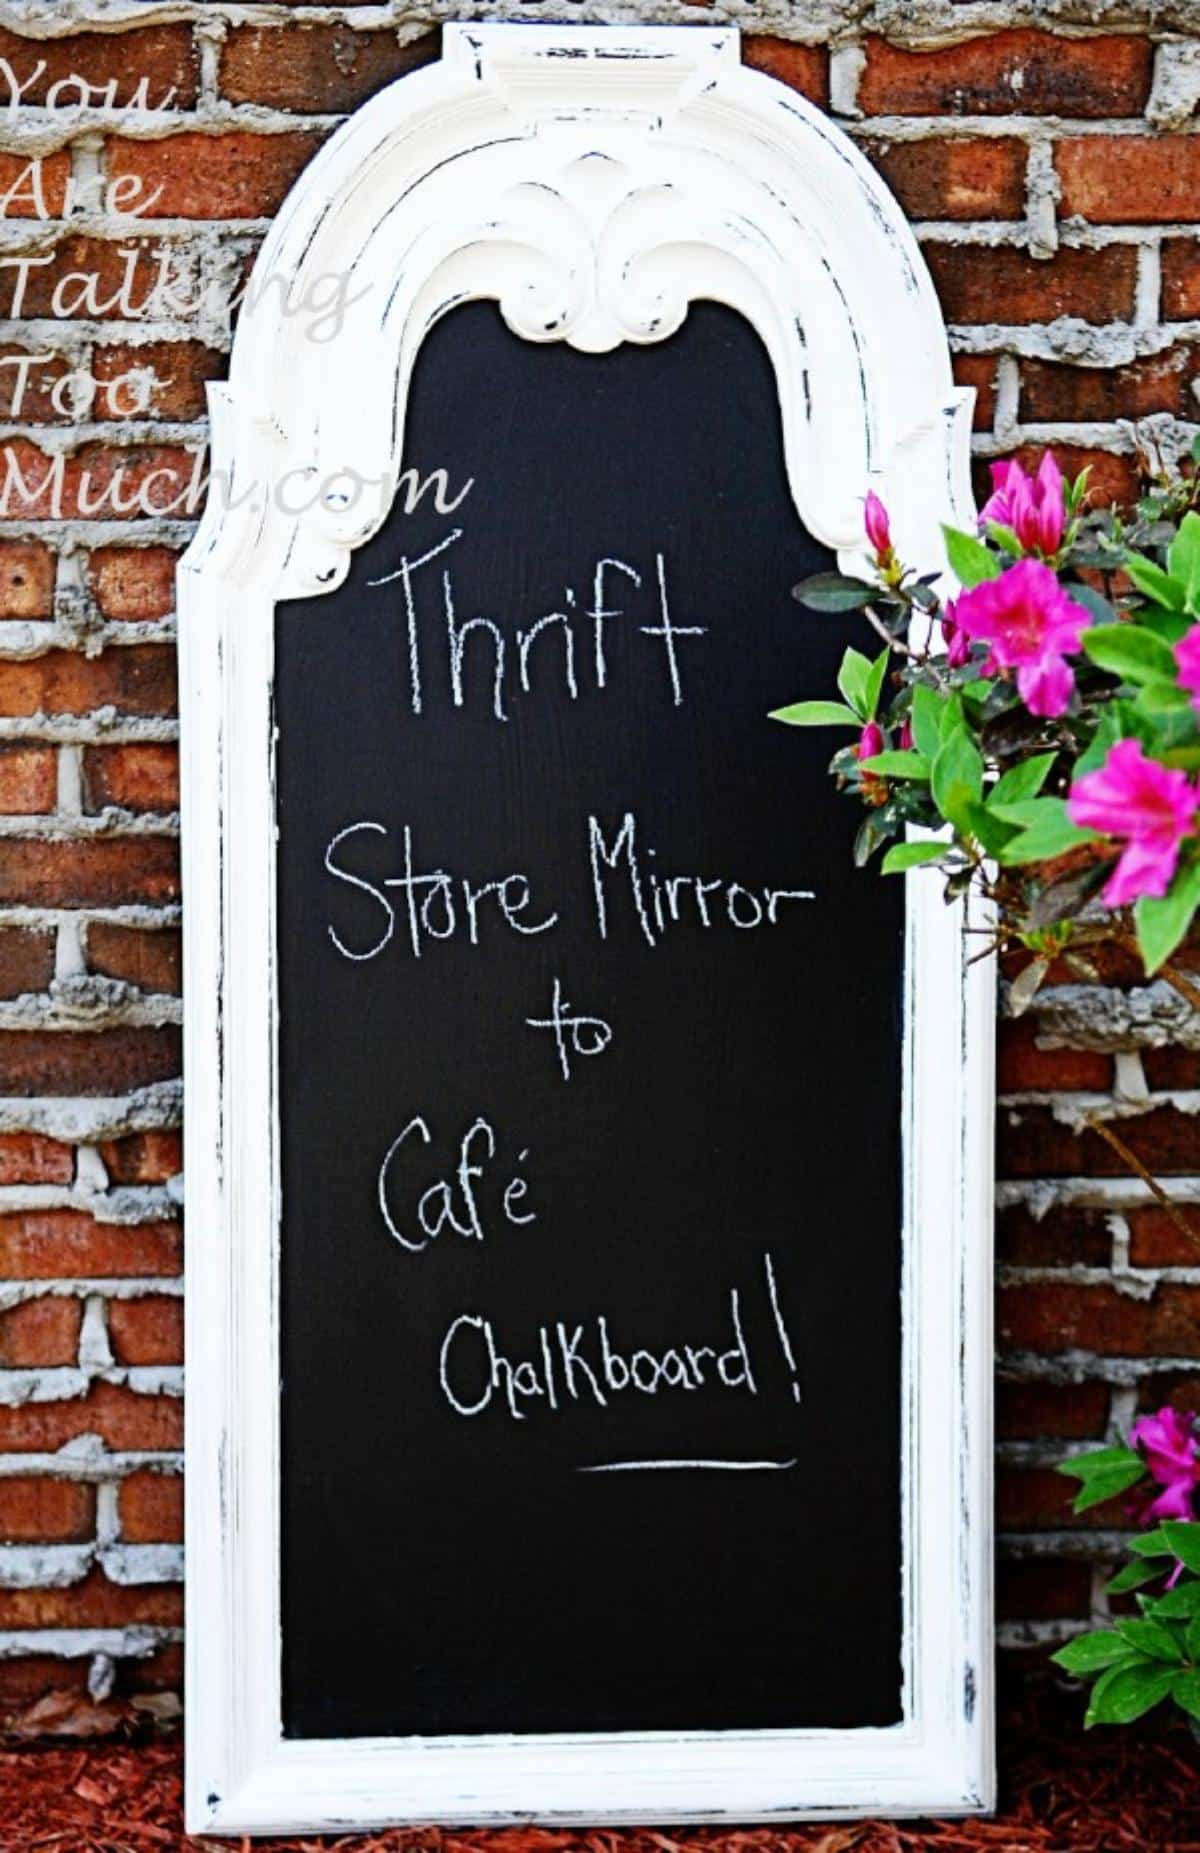 DIY Thrift store mirror to cafe chalkboard